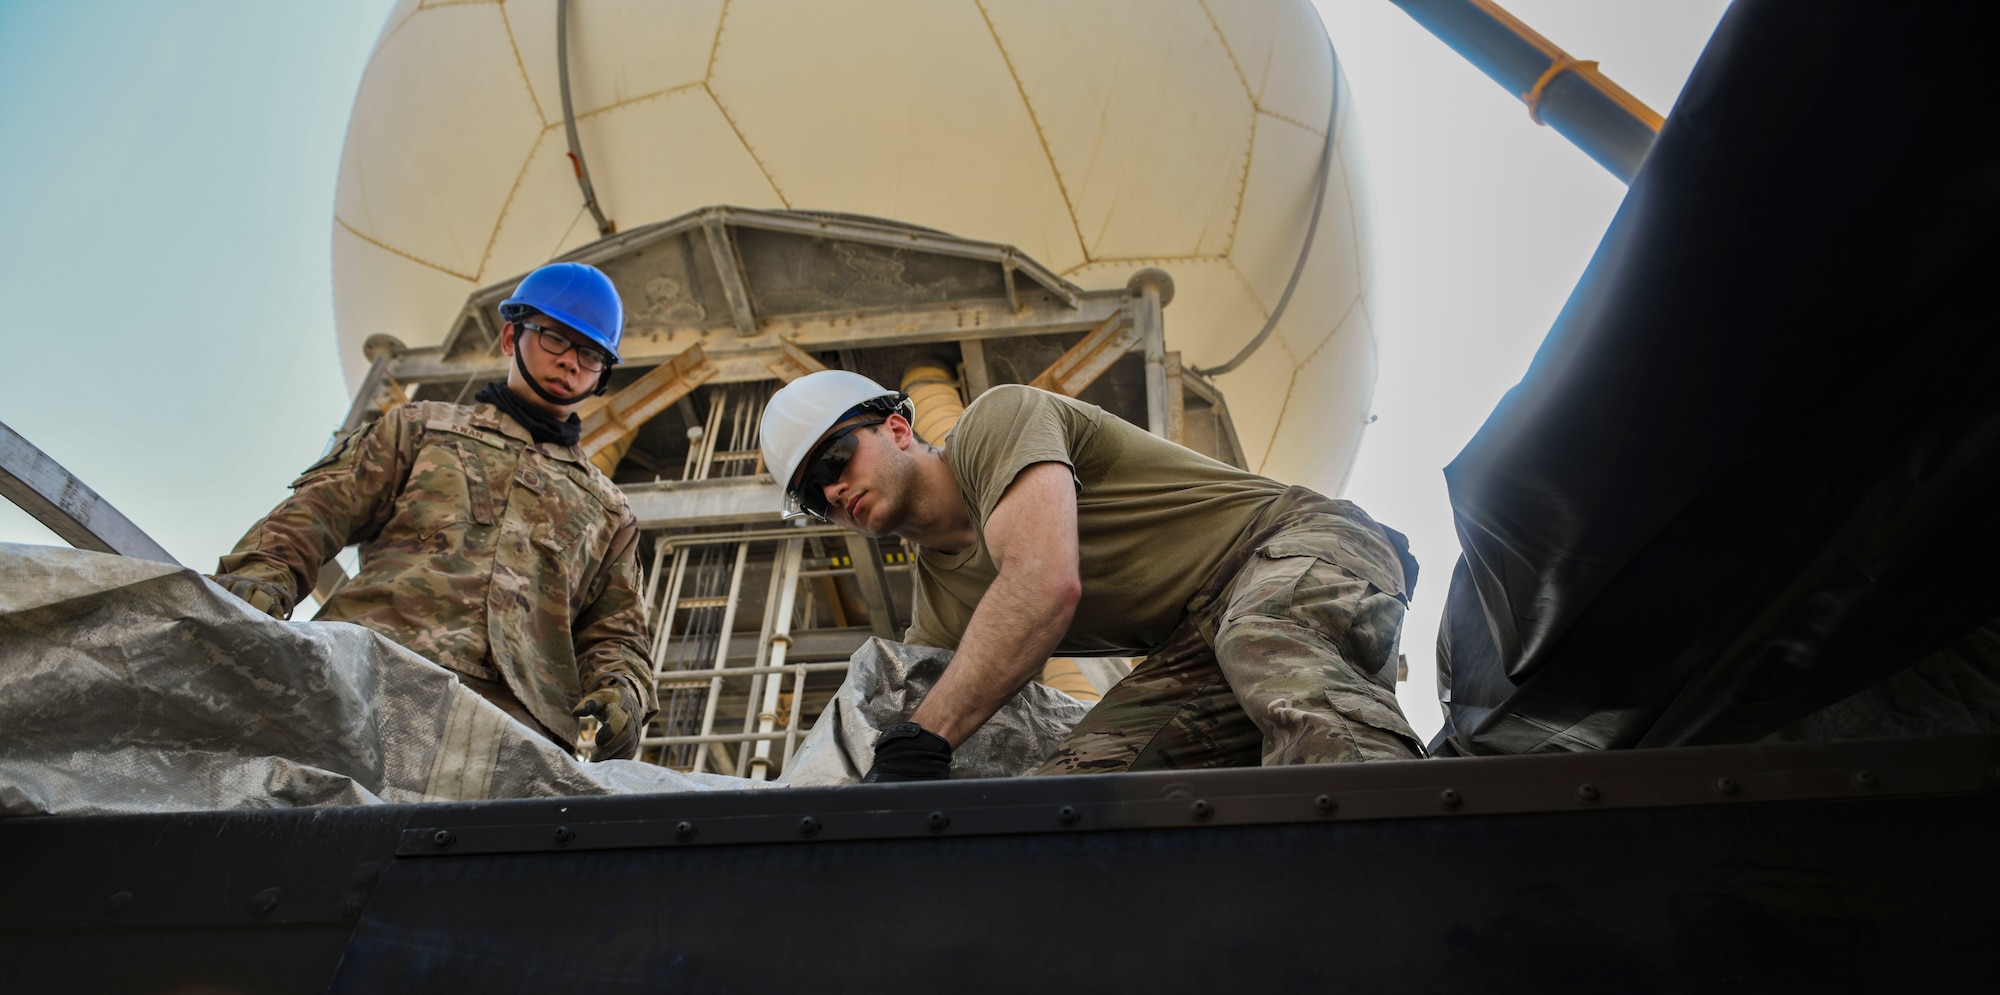 U.S. Air Force Master Sgt. Jones Kwan and Airman 1st Class Antonio De Simone, 727th Expeditionary Air Control Squadron, Detachment 3, superintendent and radar technician, respectively, drag a protective covering over a newly-replaced AN/TPS-75 radar system as part of regular maintenance July 27, 2021, at Al Udeid Air Base, Qatar. 727th EACS radar technicians perform several hours of maintenance and calibration daily to ensure radar systems perform at optimal levels. (U.S. Air Force by Staff Sgt. Alexandria Lee)